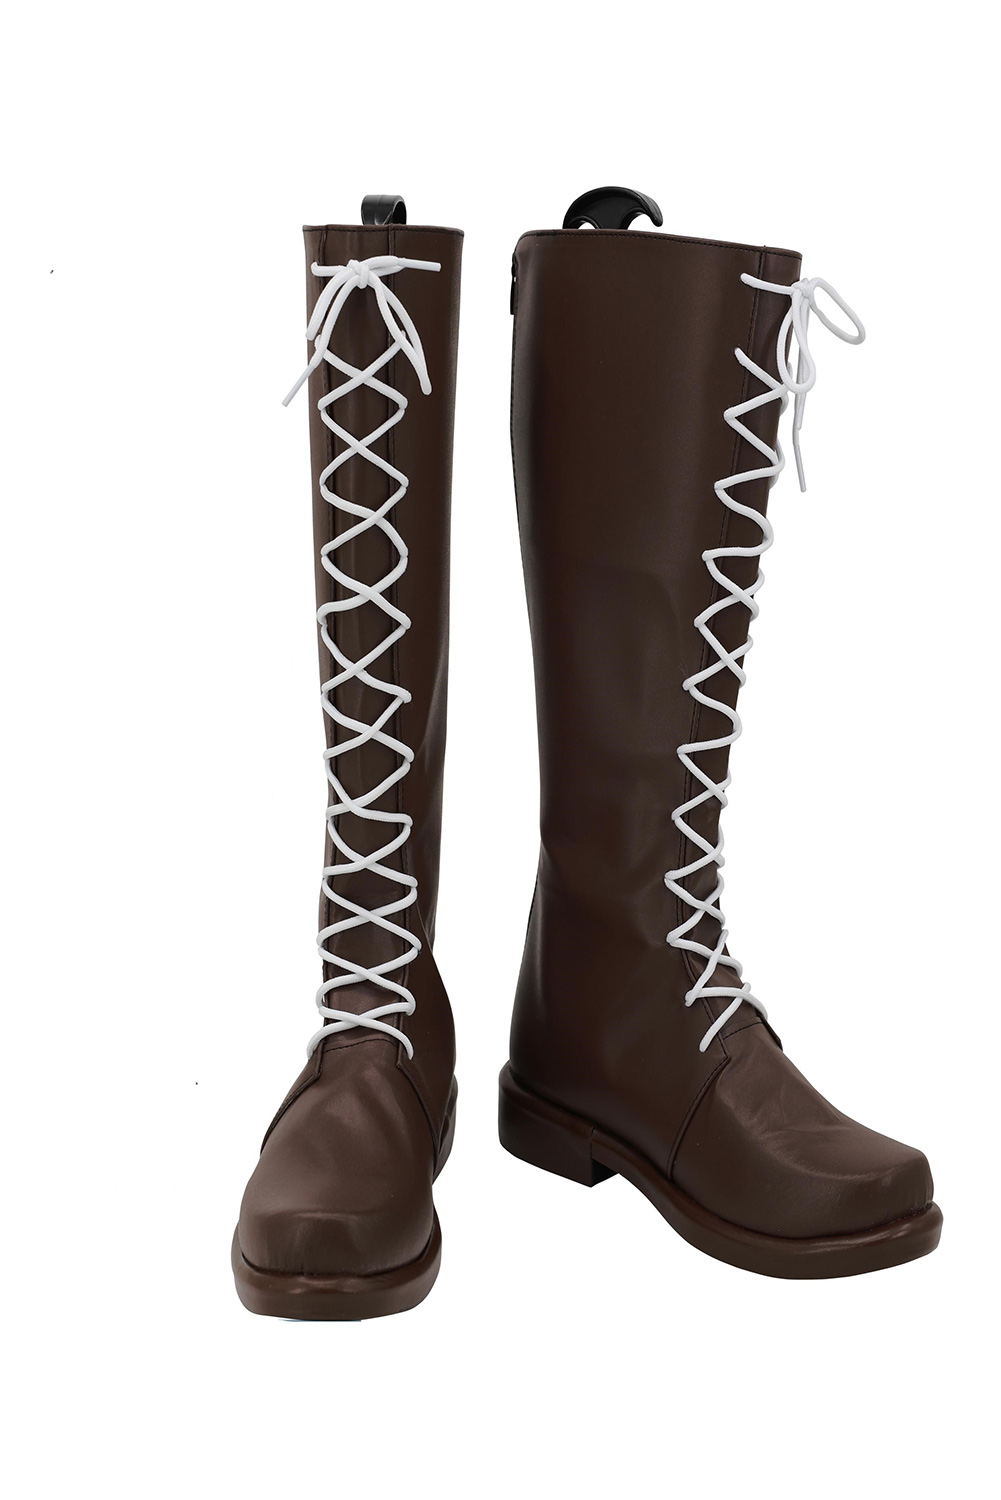 Anime Frieren: Beyond Journey's End Stark Cosplay Shoes Boots Halloween Custom Made Costumes Accessory 